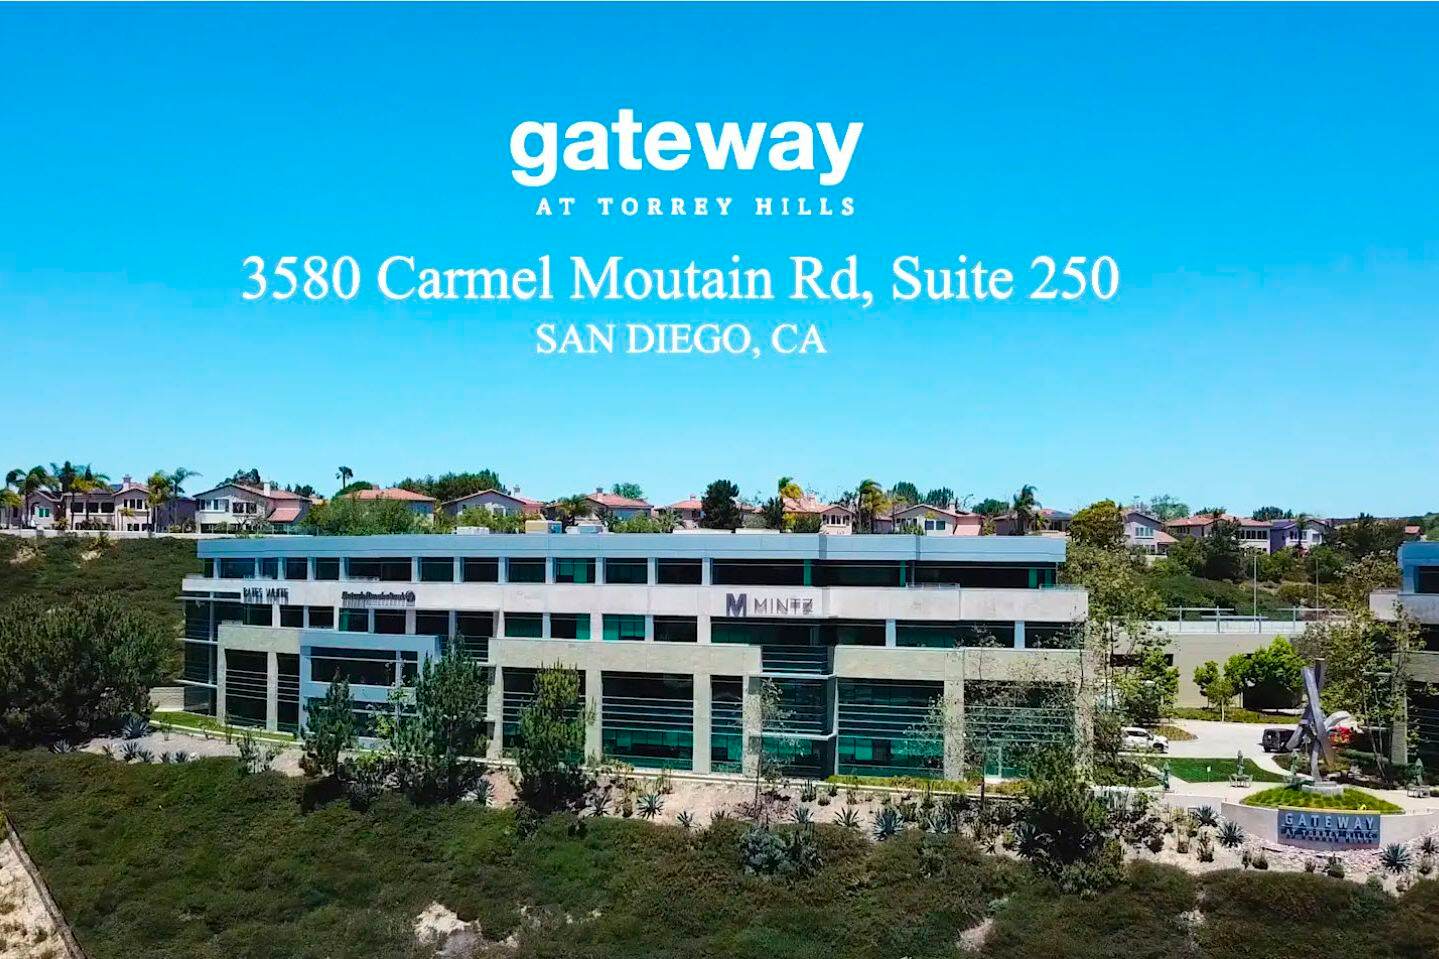 3580 Carmel Mountain Road  Suite 250 in Sand Diego, CA